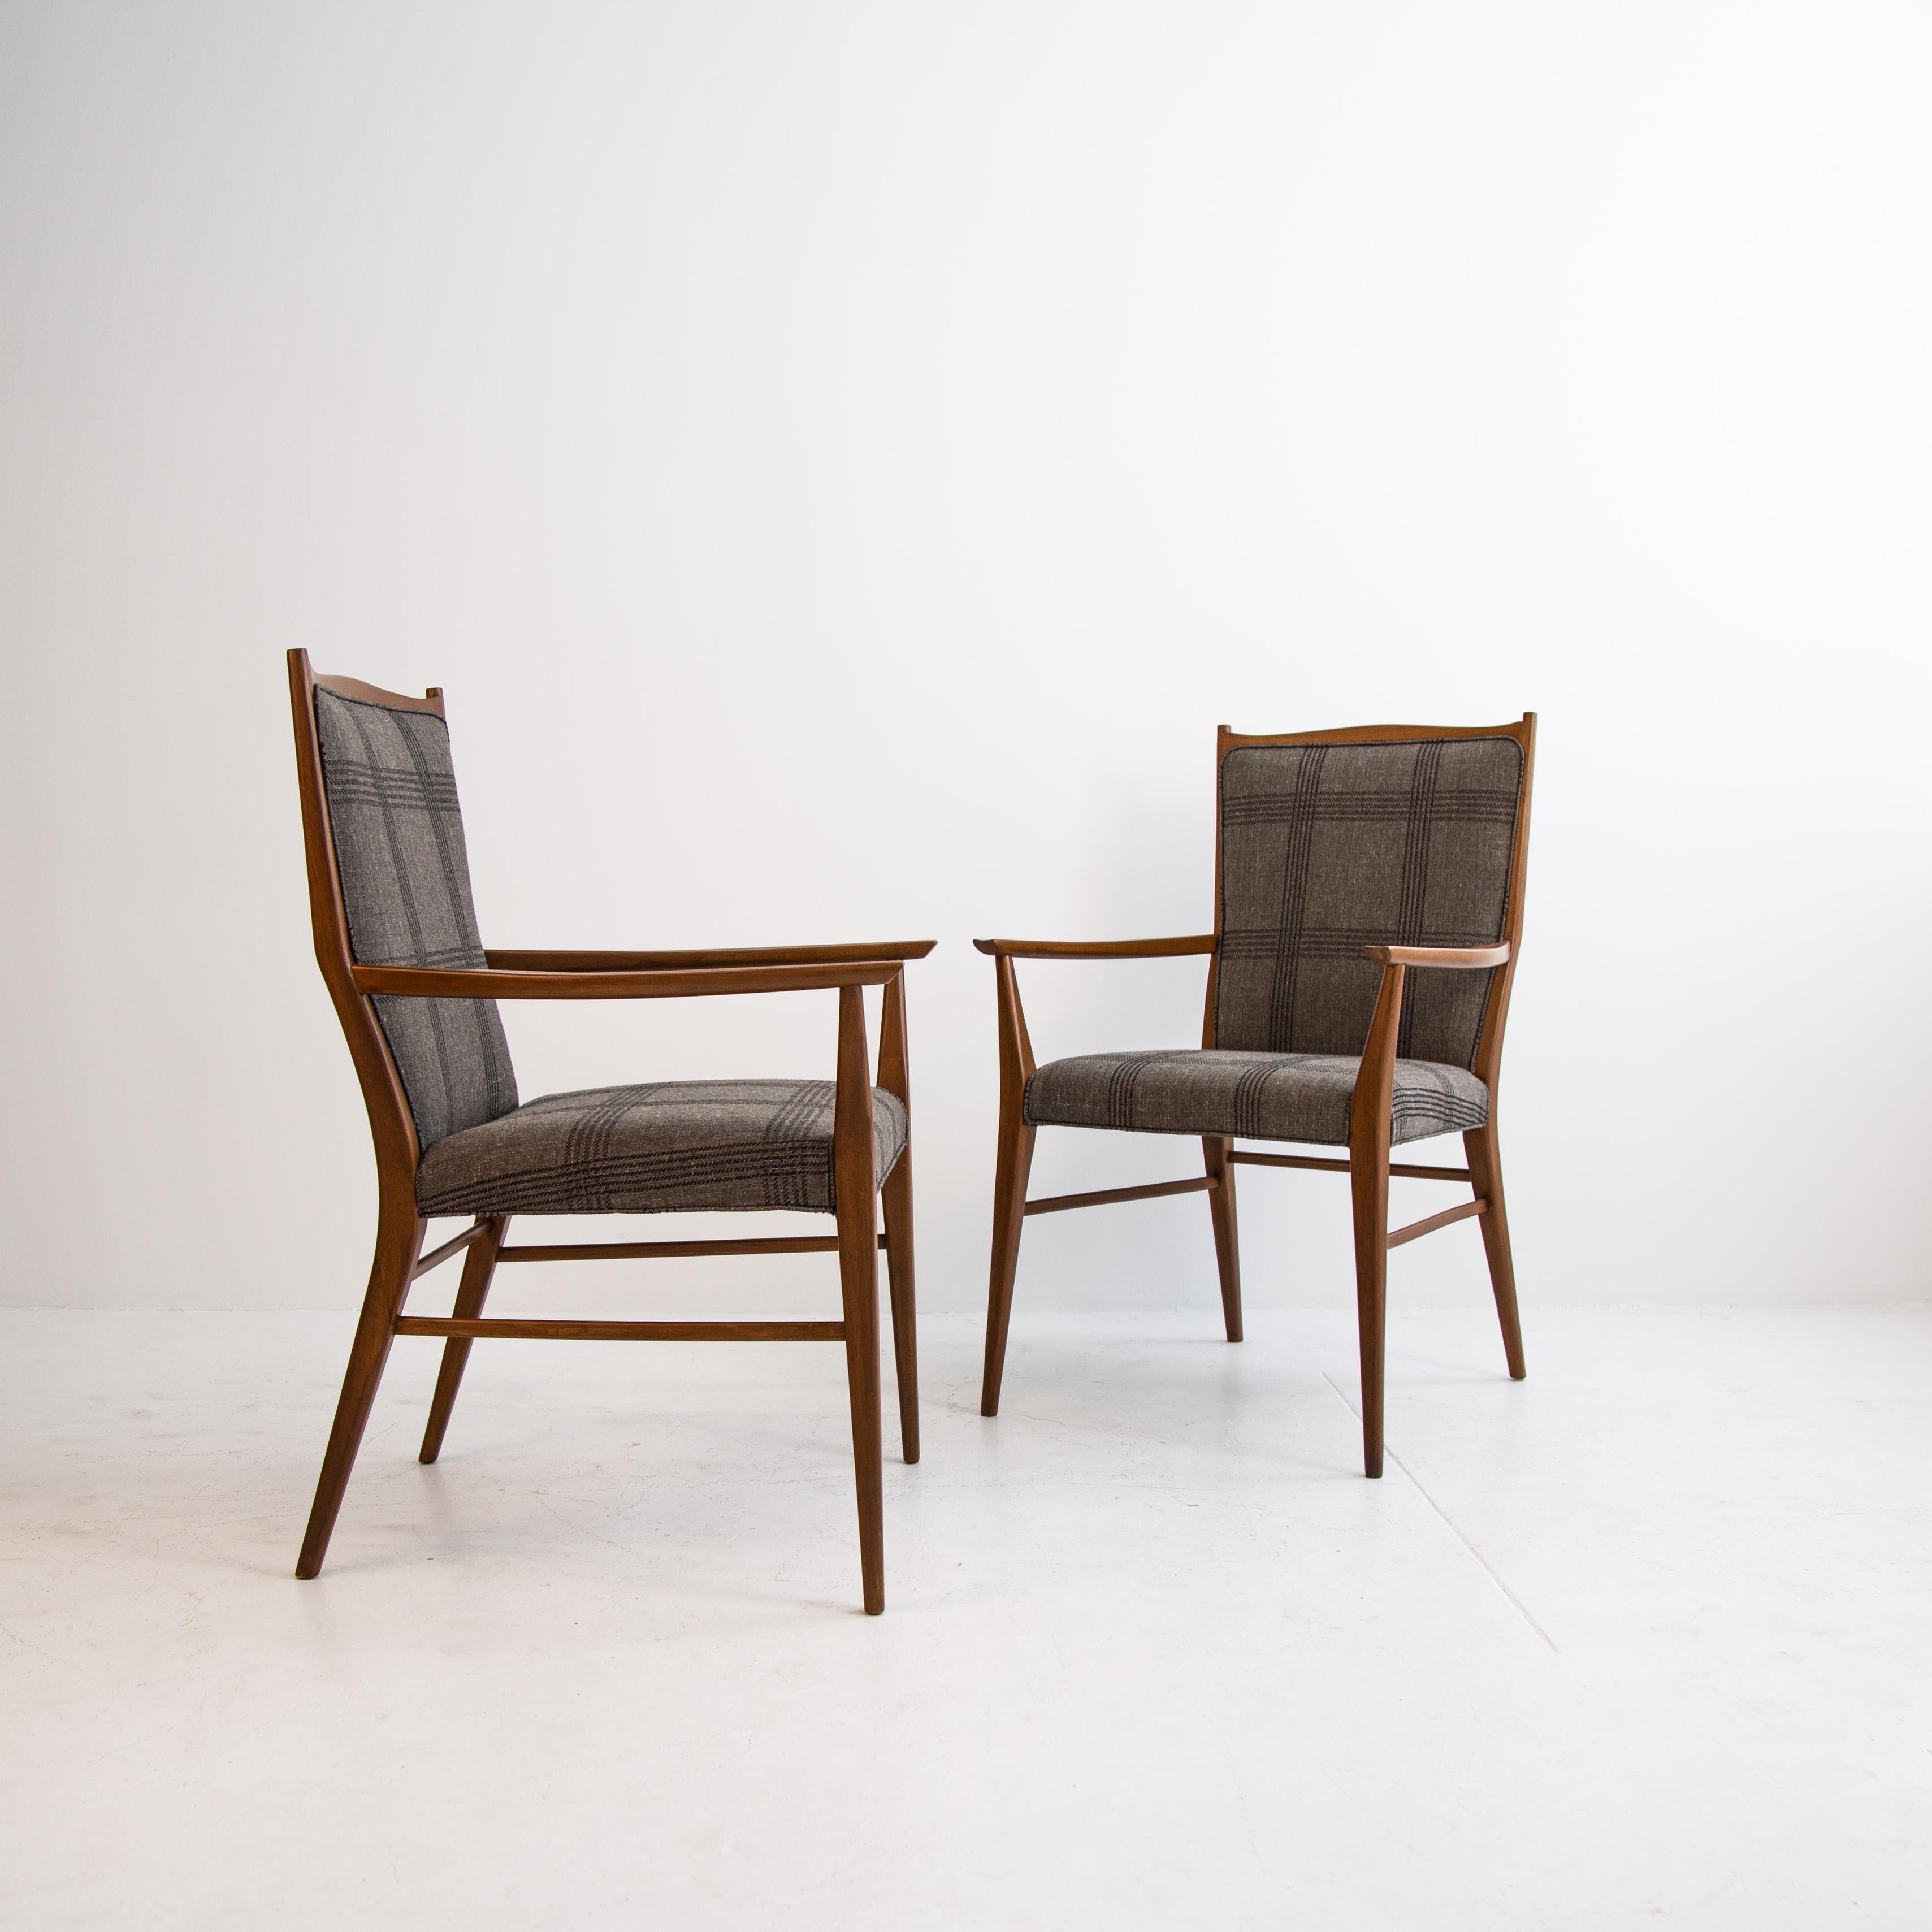 A delicate pair of Danish Mid-Century Modern Paul McCobb upholstered armchairs newly reupholstered in grey and black linen with a fully restored wood frame stained in dark walnut. The chairs feature an elegant curvature to the legs, armrest, and